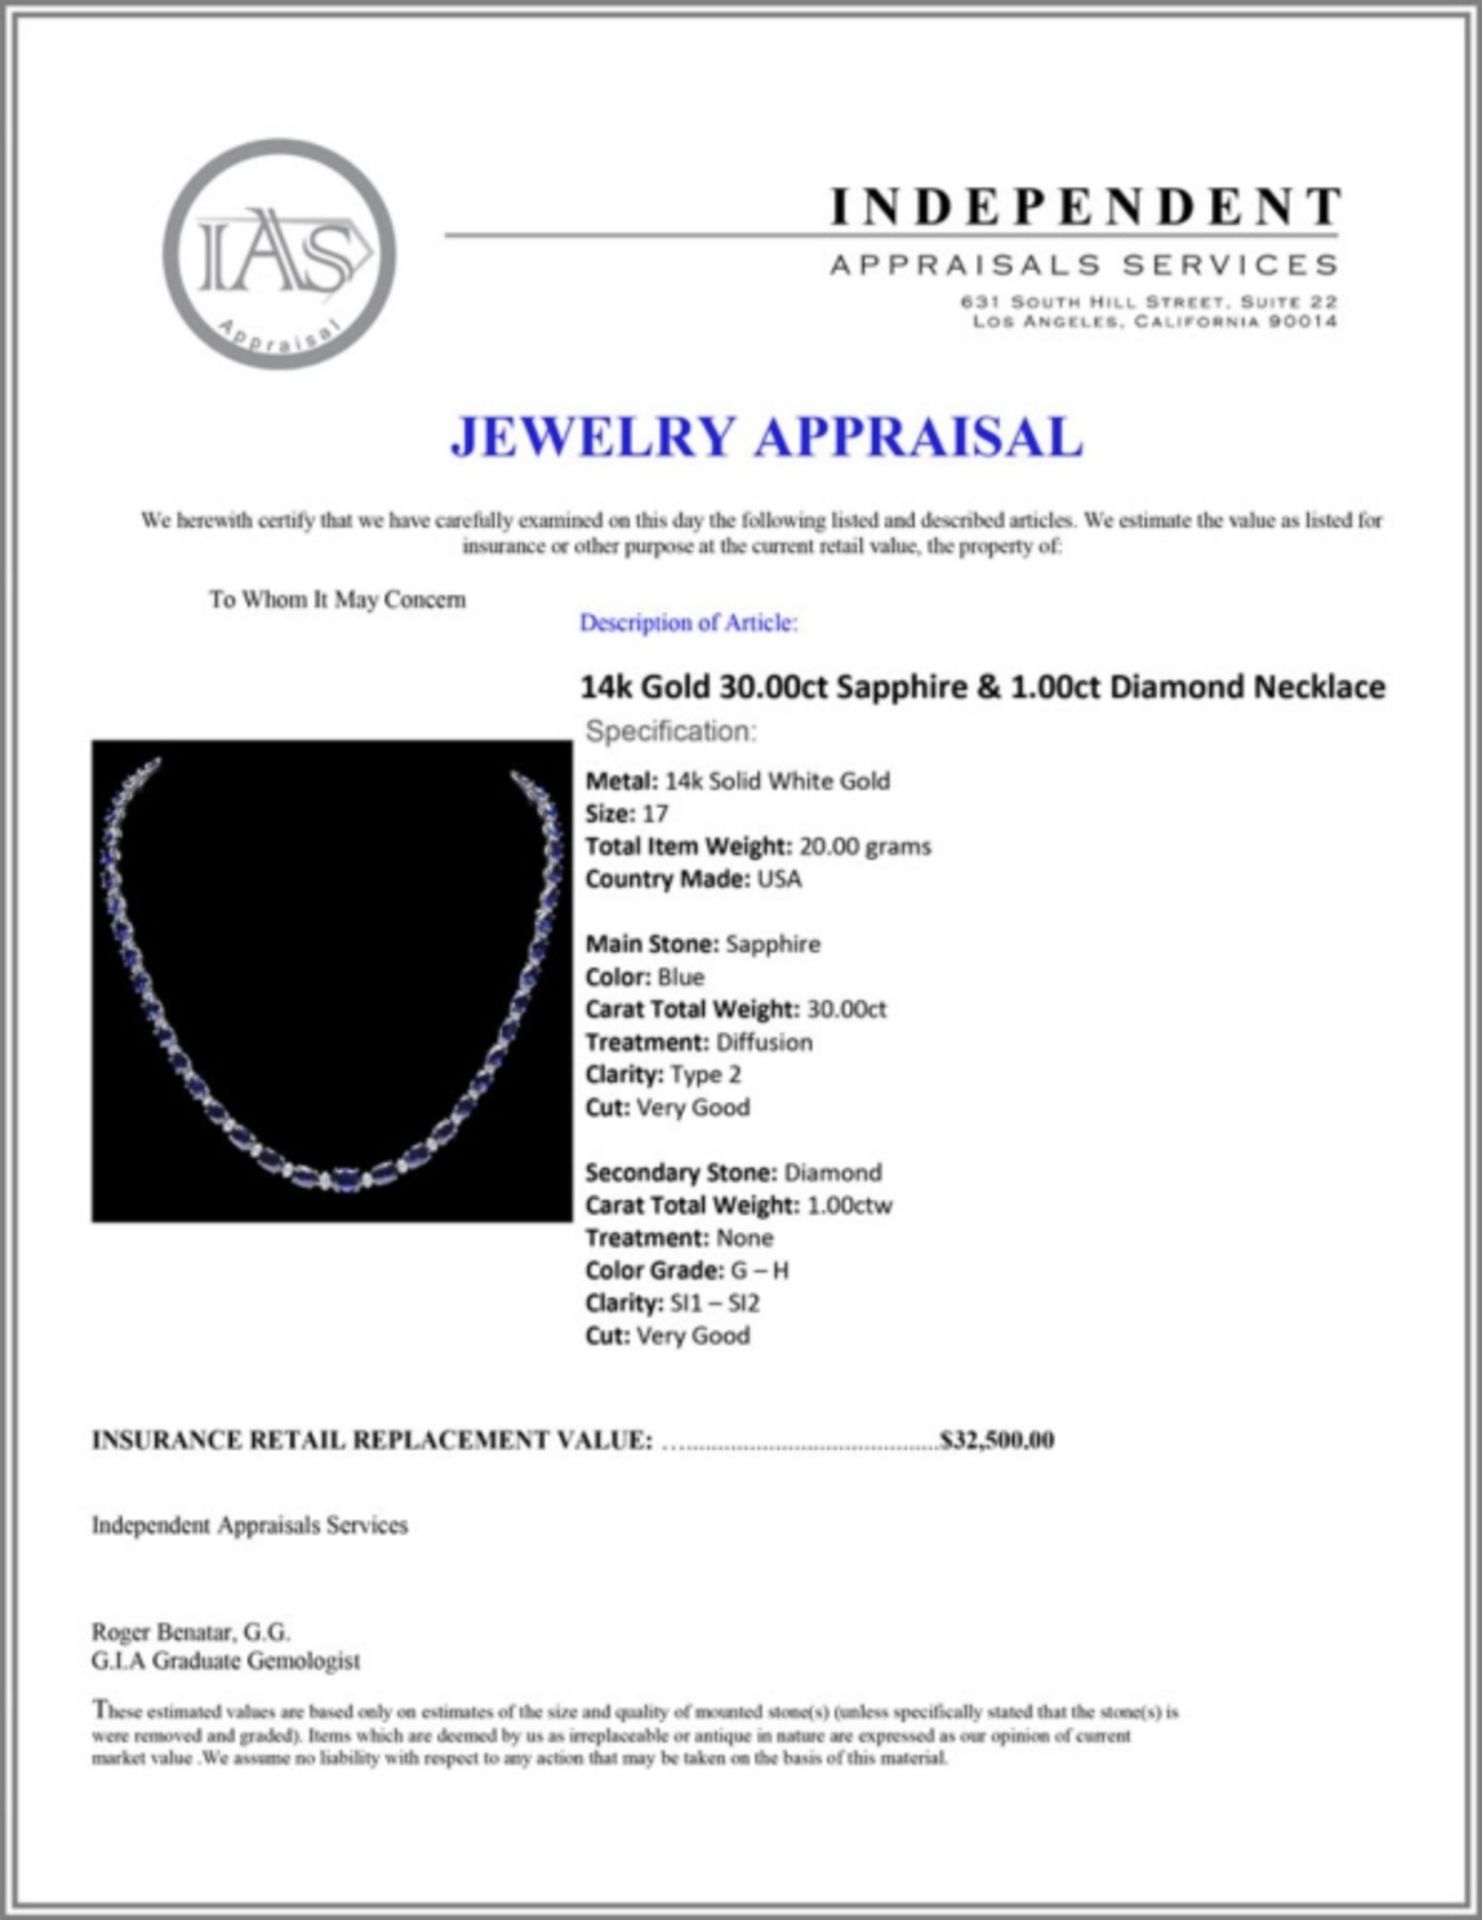 14k Gold 30.00ct Sapphire & 1.00ct Diam Necklace - Image 3 of 3